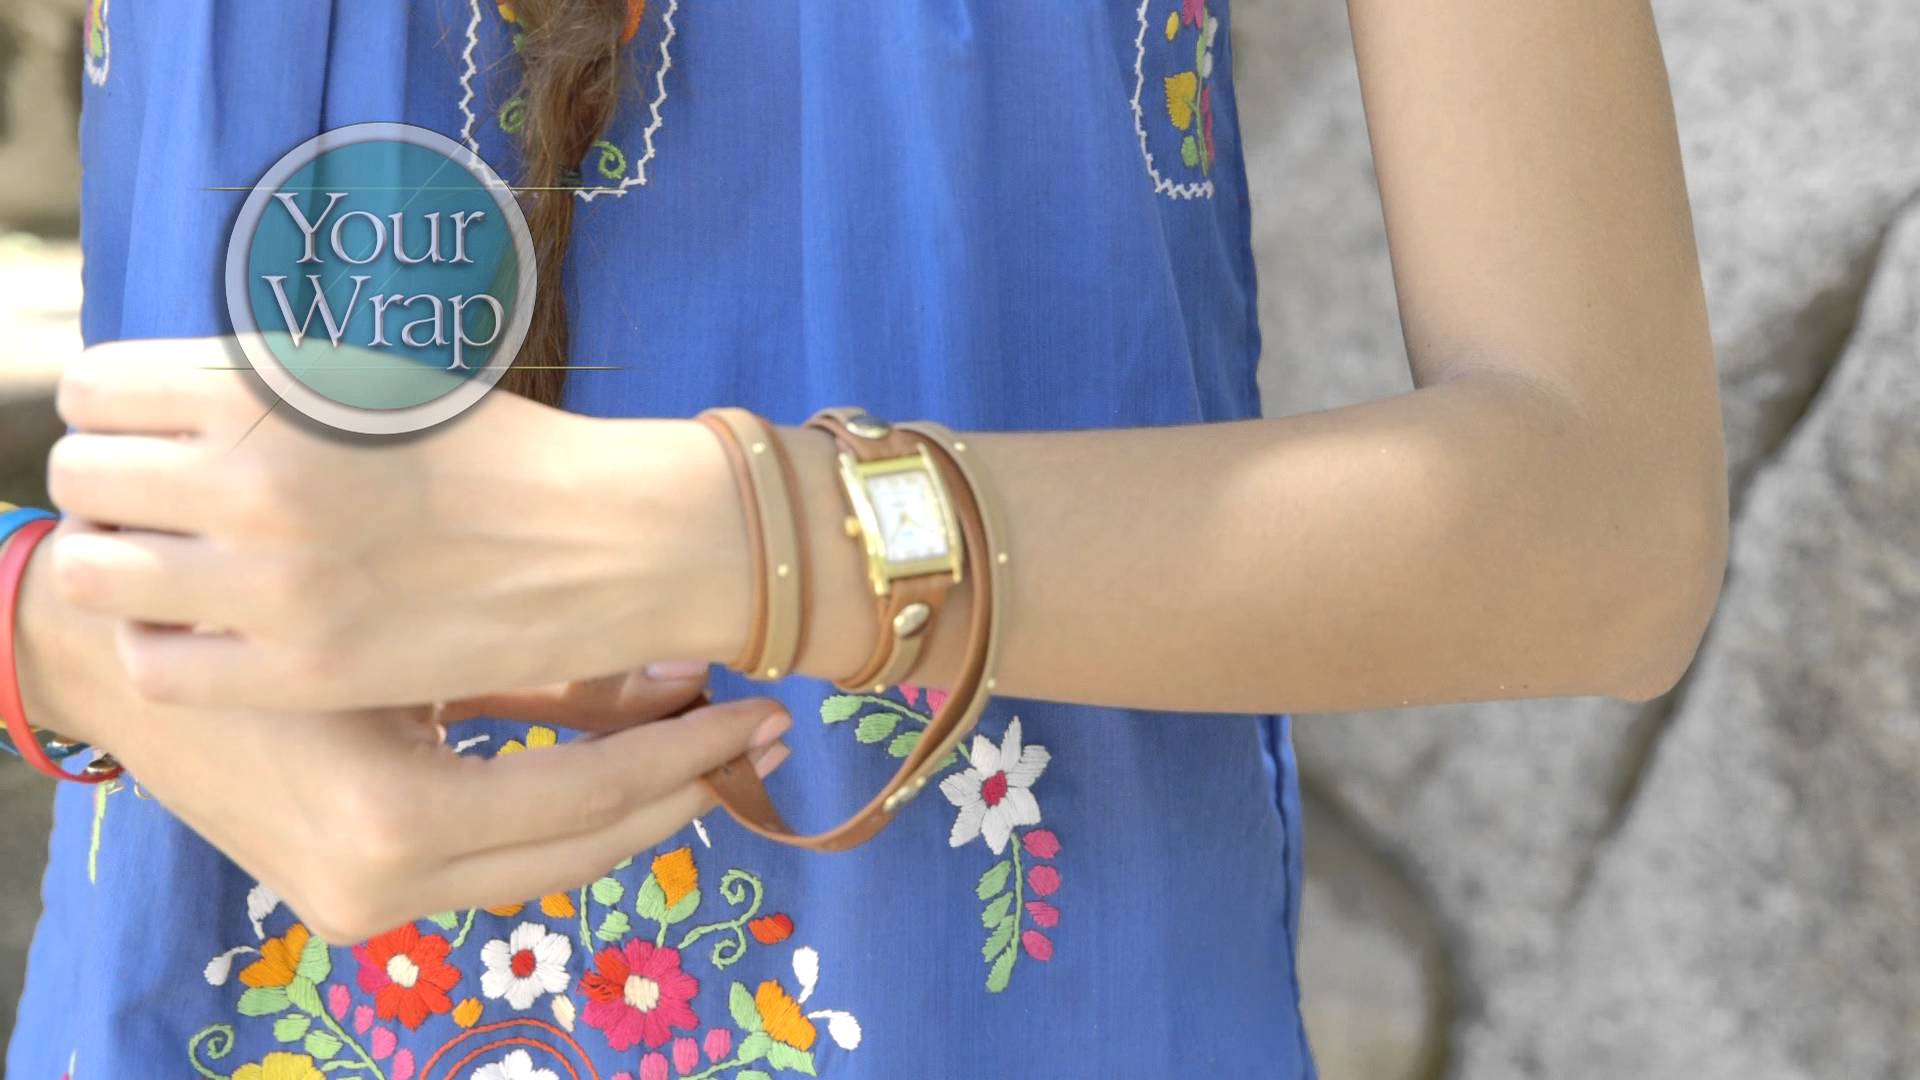 How to Wrap Your La Mer Collections' watch! - YouTube